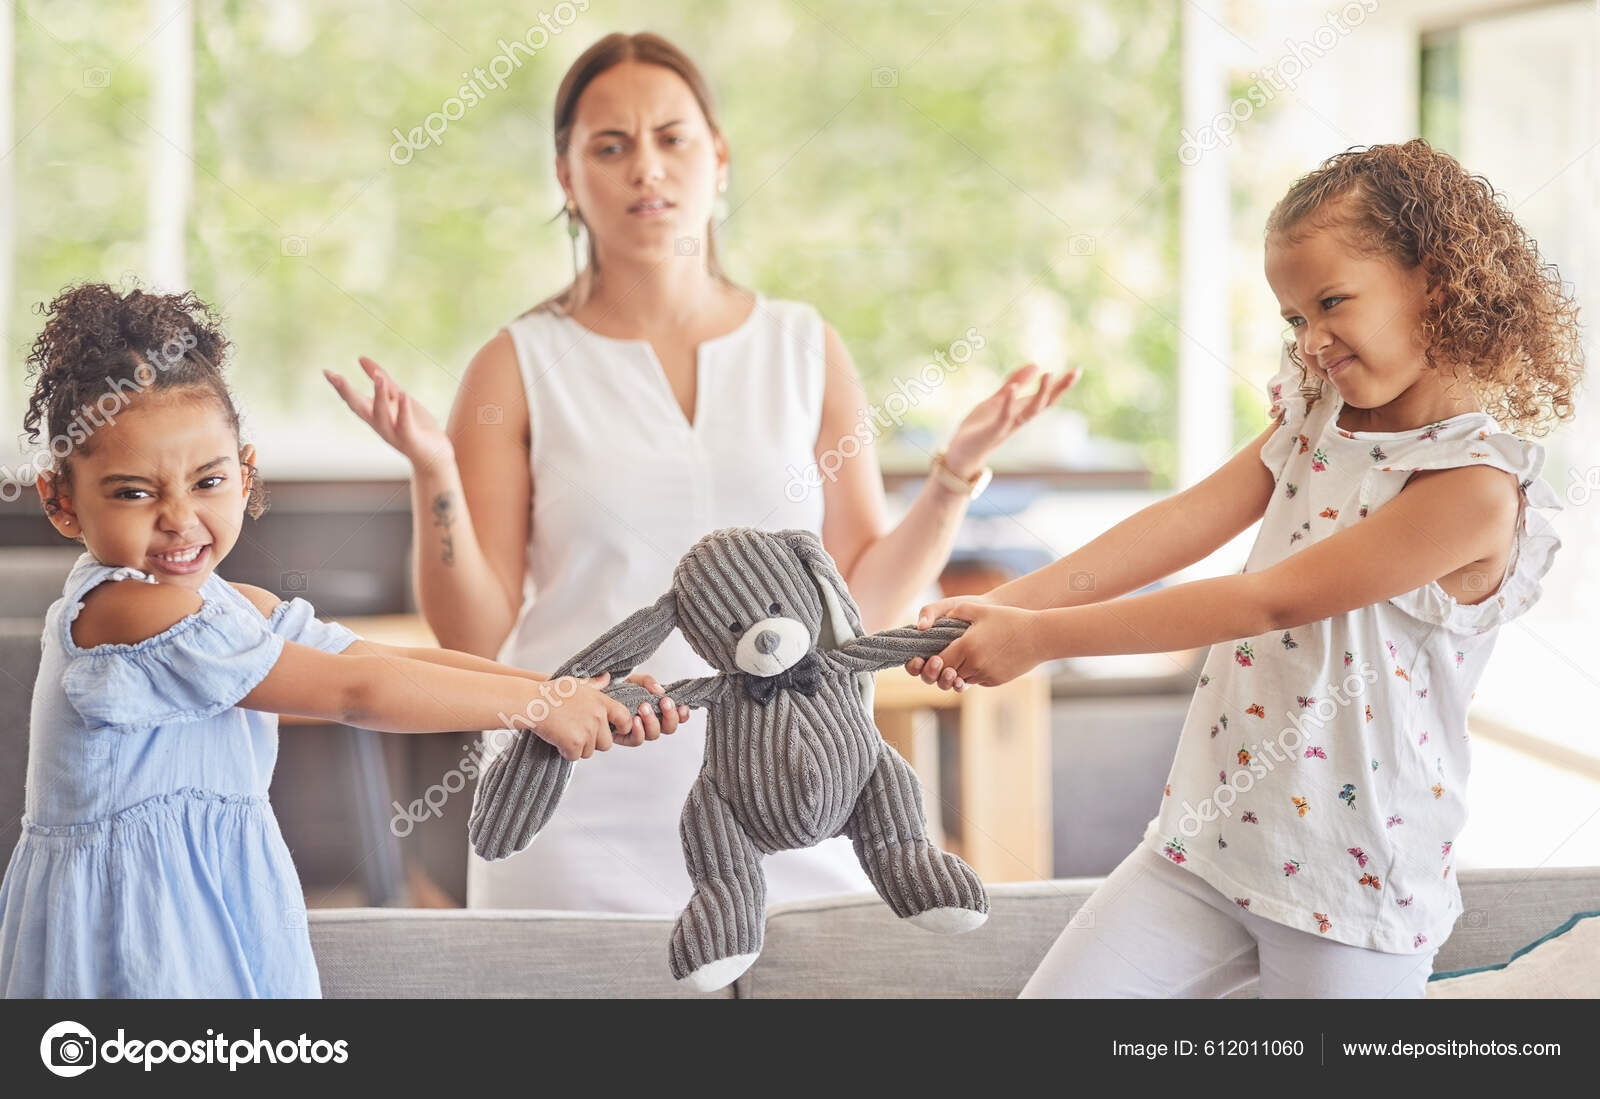 depositphotos 612011060 stock photo toys fight kids angry children